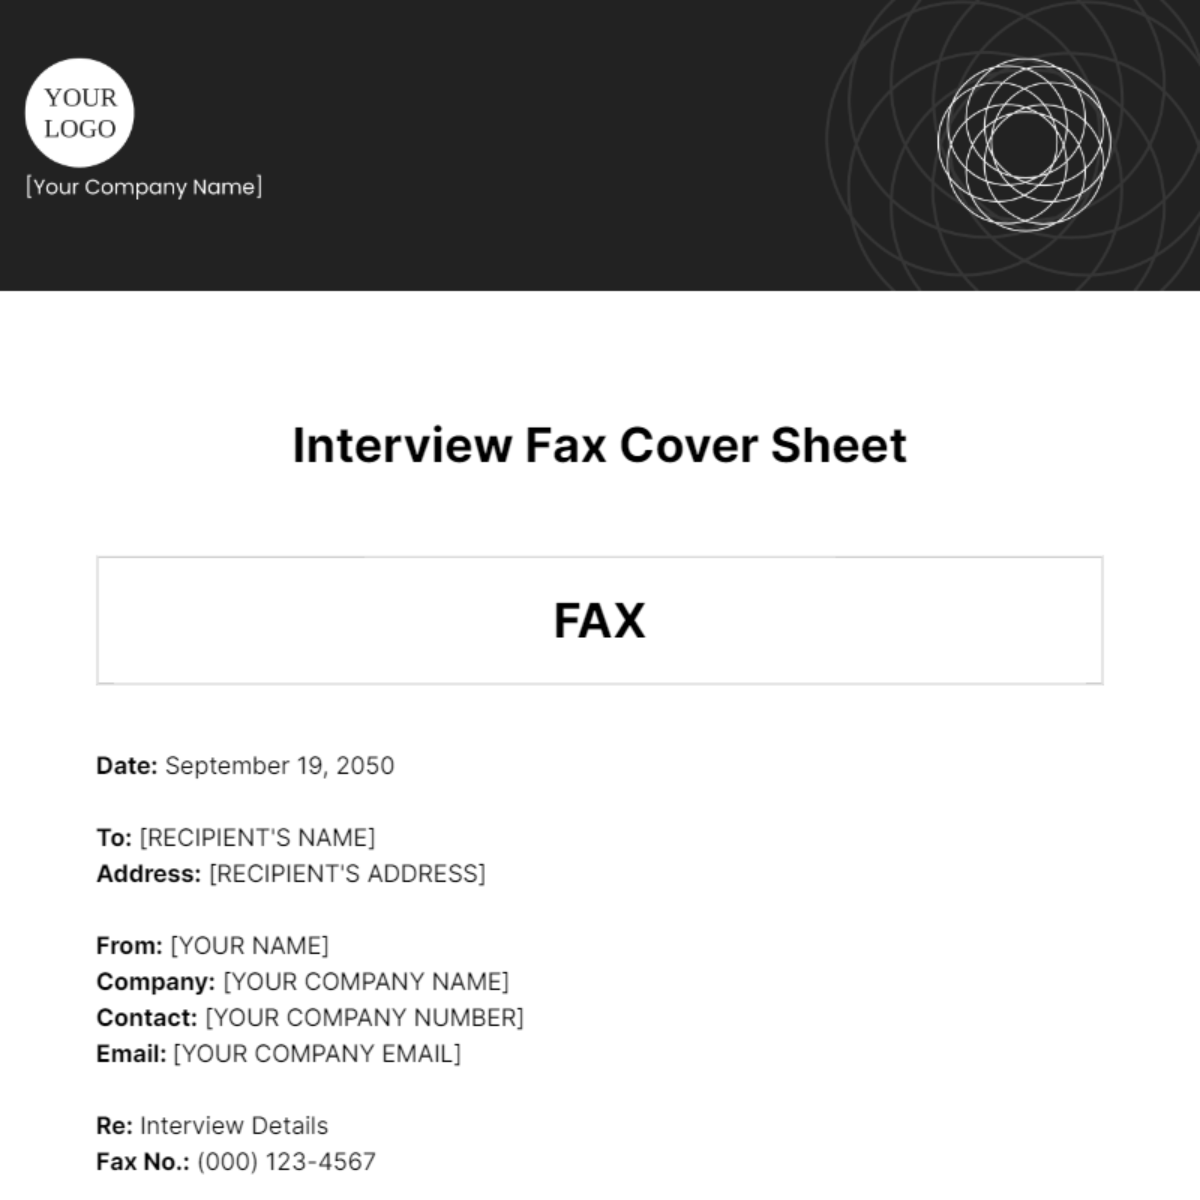 Interview Fax Cover Sheet Template